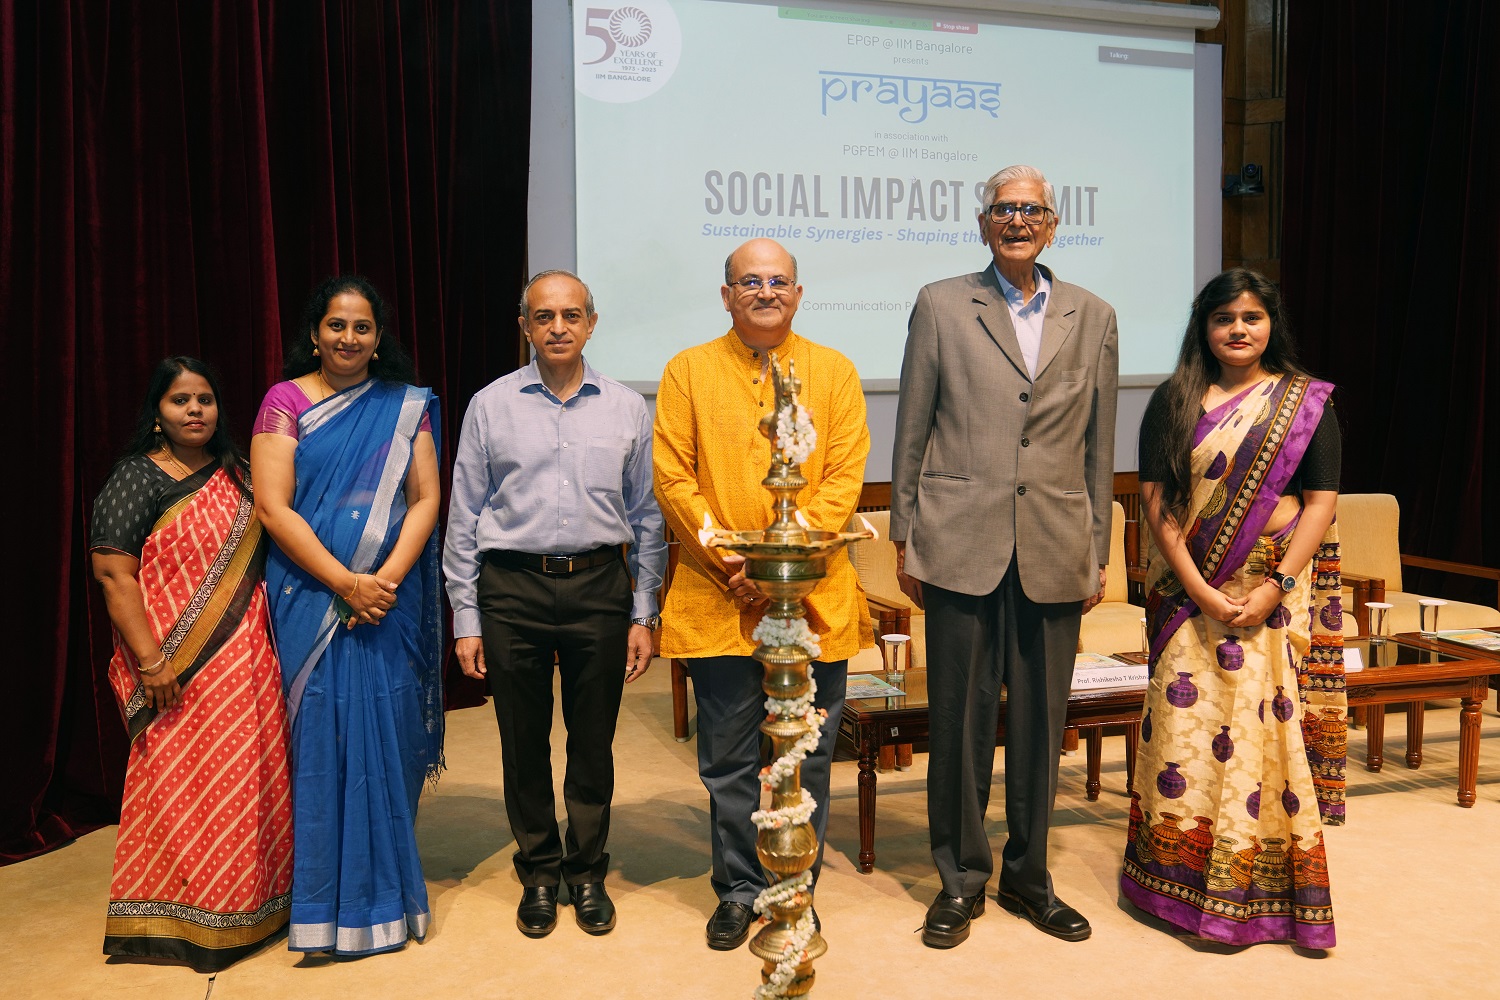 Prof. Ashok Thampy, Chairperson, Executive Post Graduate Programme in Management, Prof. Rishikesha T Krishnan, Director, IIM Bangalore, D R Mehta, former Chairman, SEBI, and Founder and Chief Patron of Bhagwan Mahaveer Viklang Sahayata Samiti, inaugurate the social impact summit, ‘Sustainable Synergies – Shaping the Future Together’, on 18th February 2024, as part of Prayaas Day 2024, at IIMB. Prayaas is the social responsibility initiative of EPGP, which is aligned to IIMB’s ethos of building socially responsible leaders.